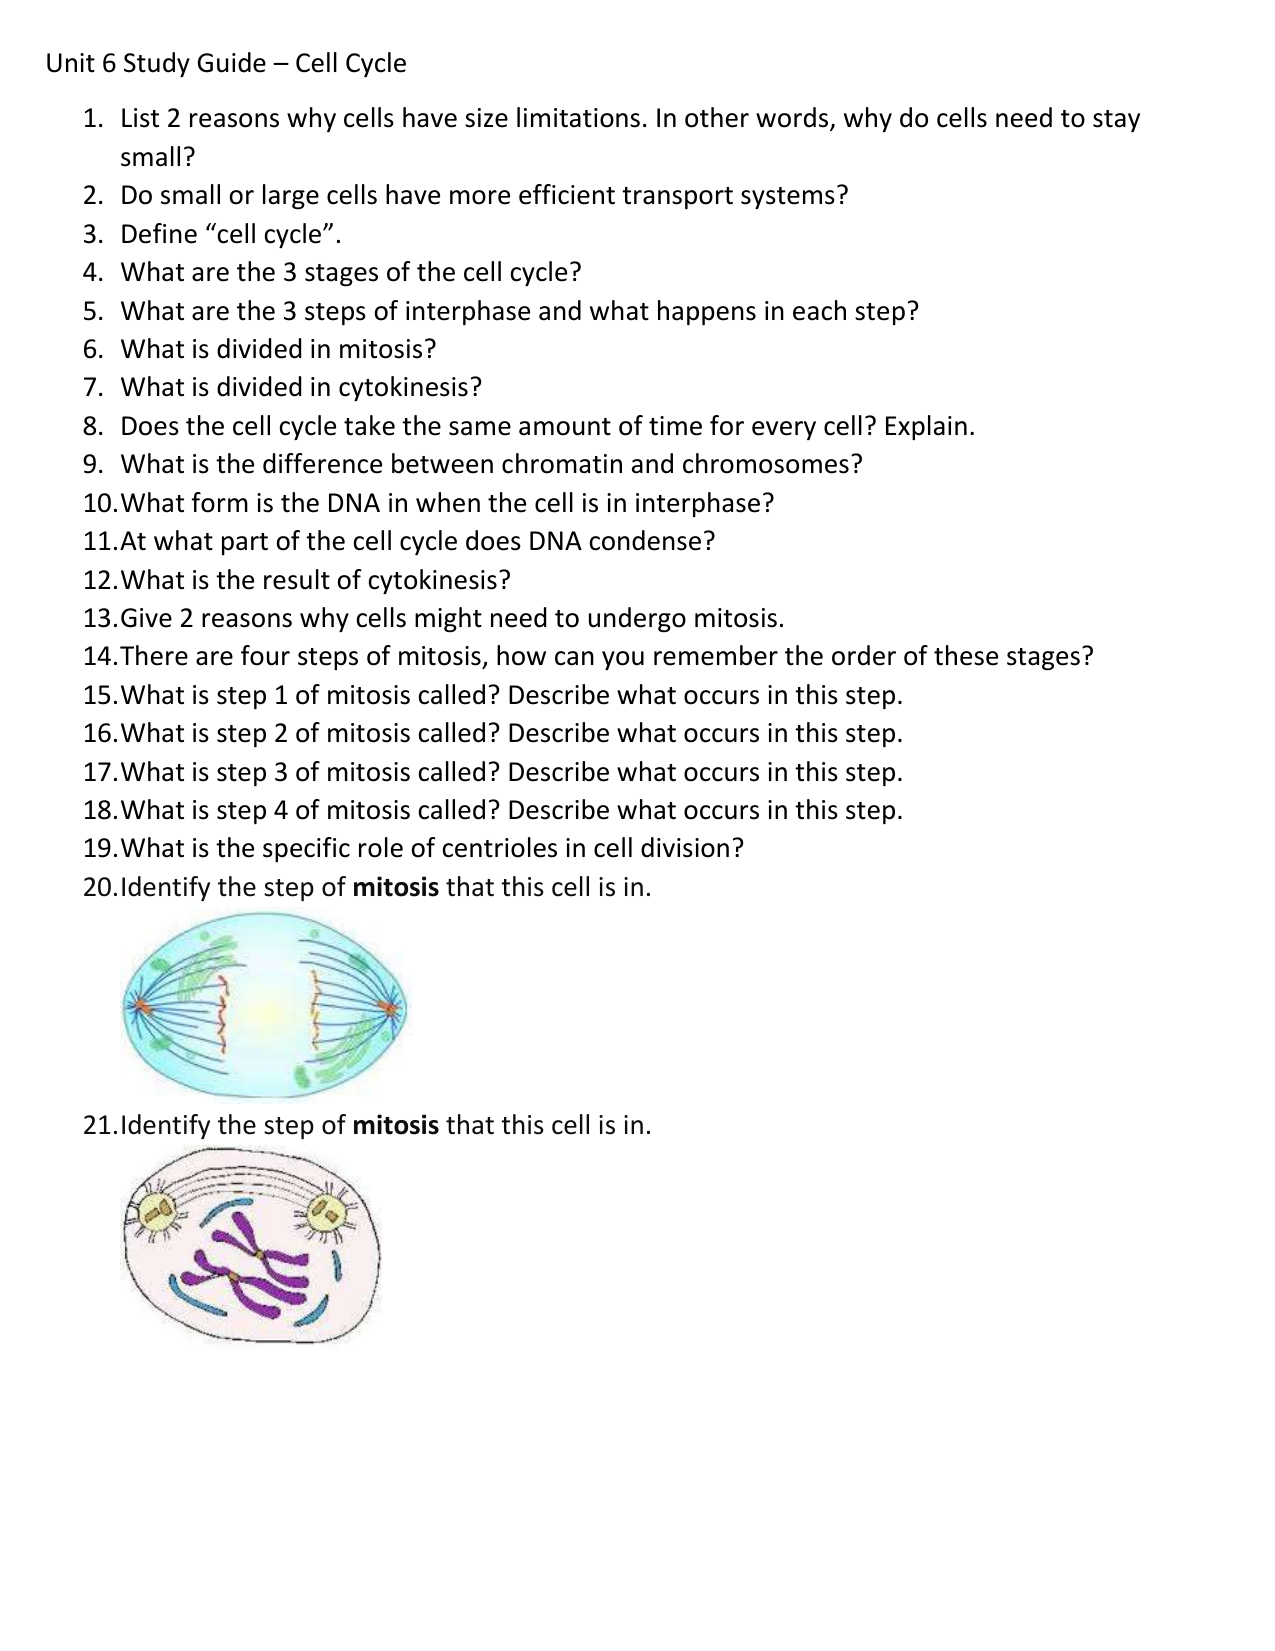 Study Guide - Cell Cycle